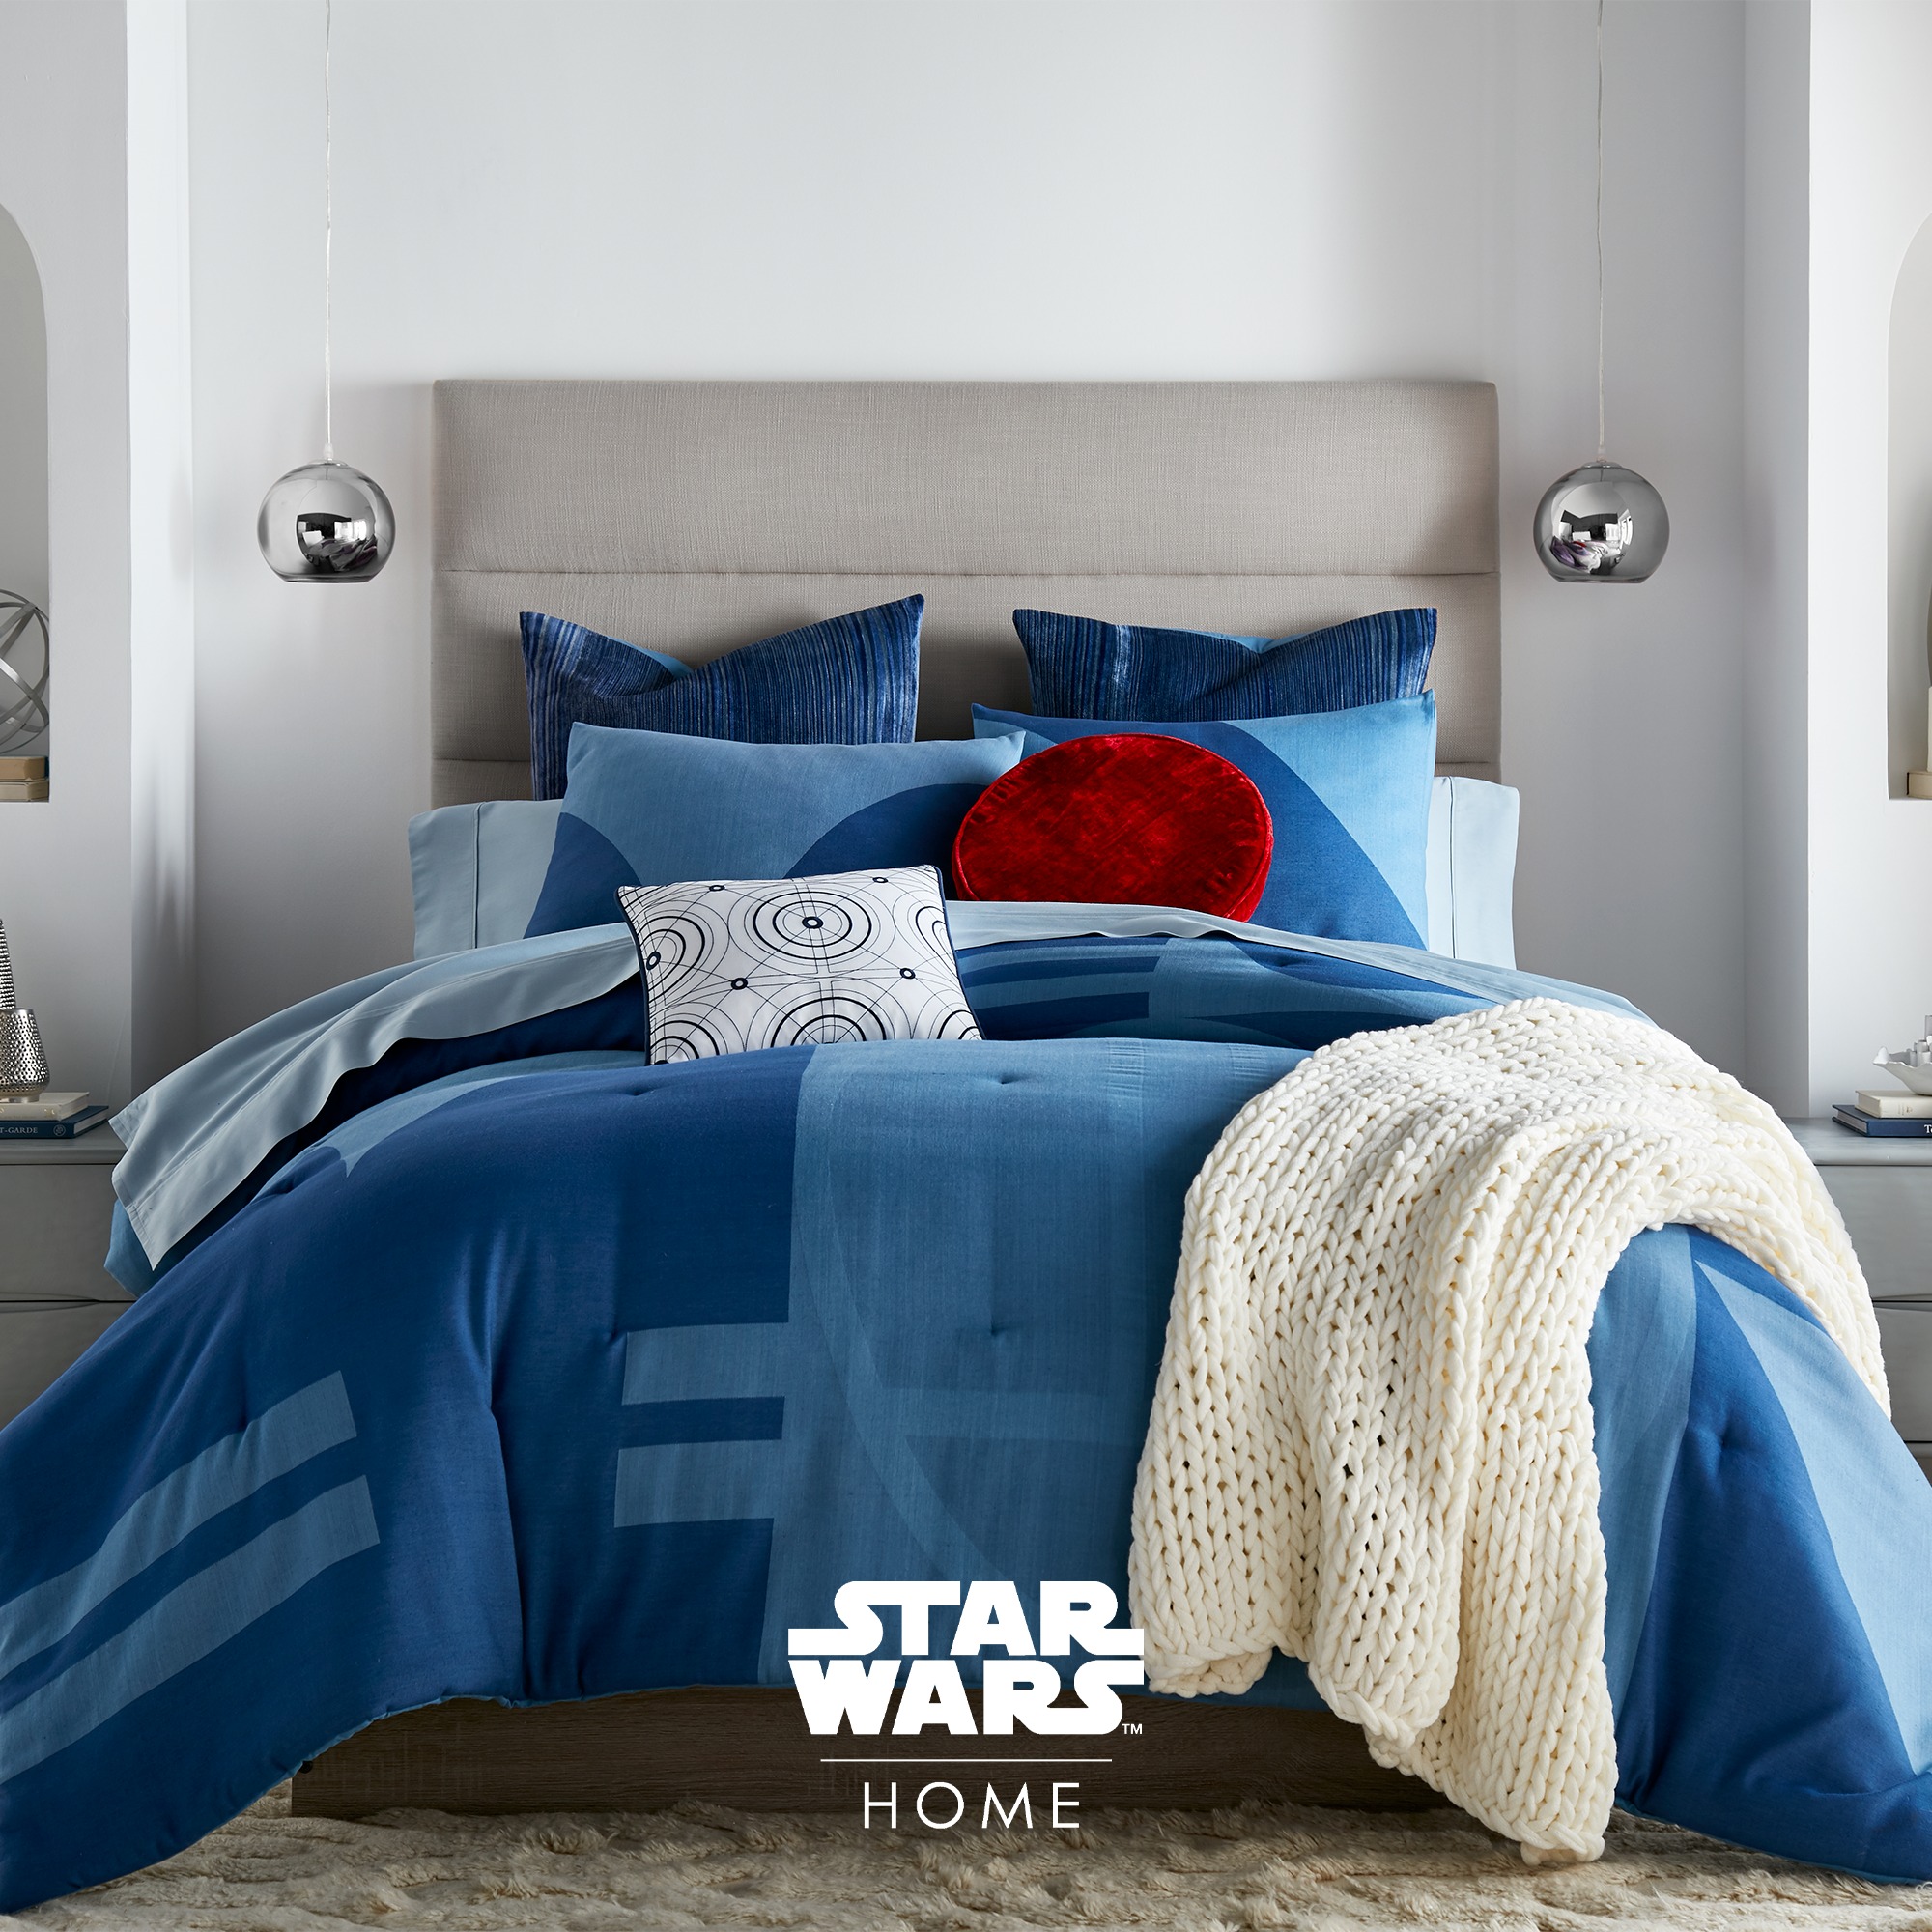 Sobel Westex Star Wars™ Astormech bedding collection foot view metallic blues,white Light Galaxy throw and round red eye pillow